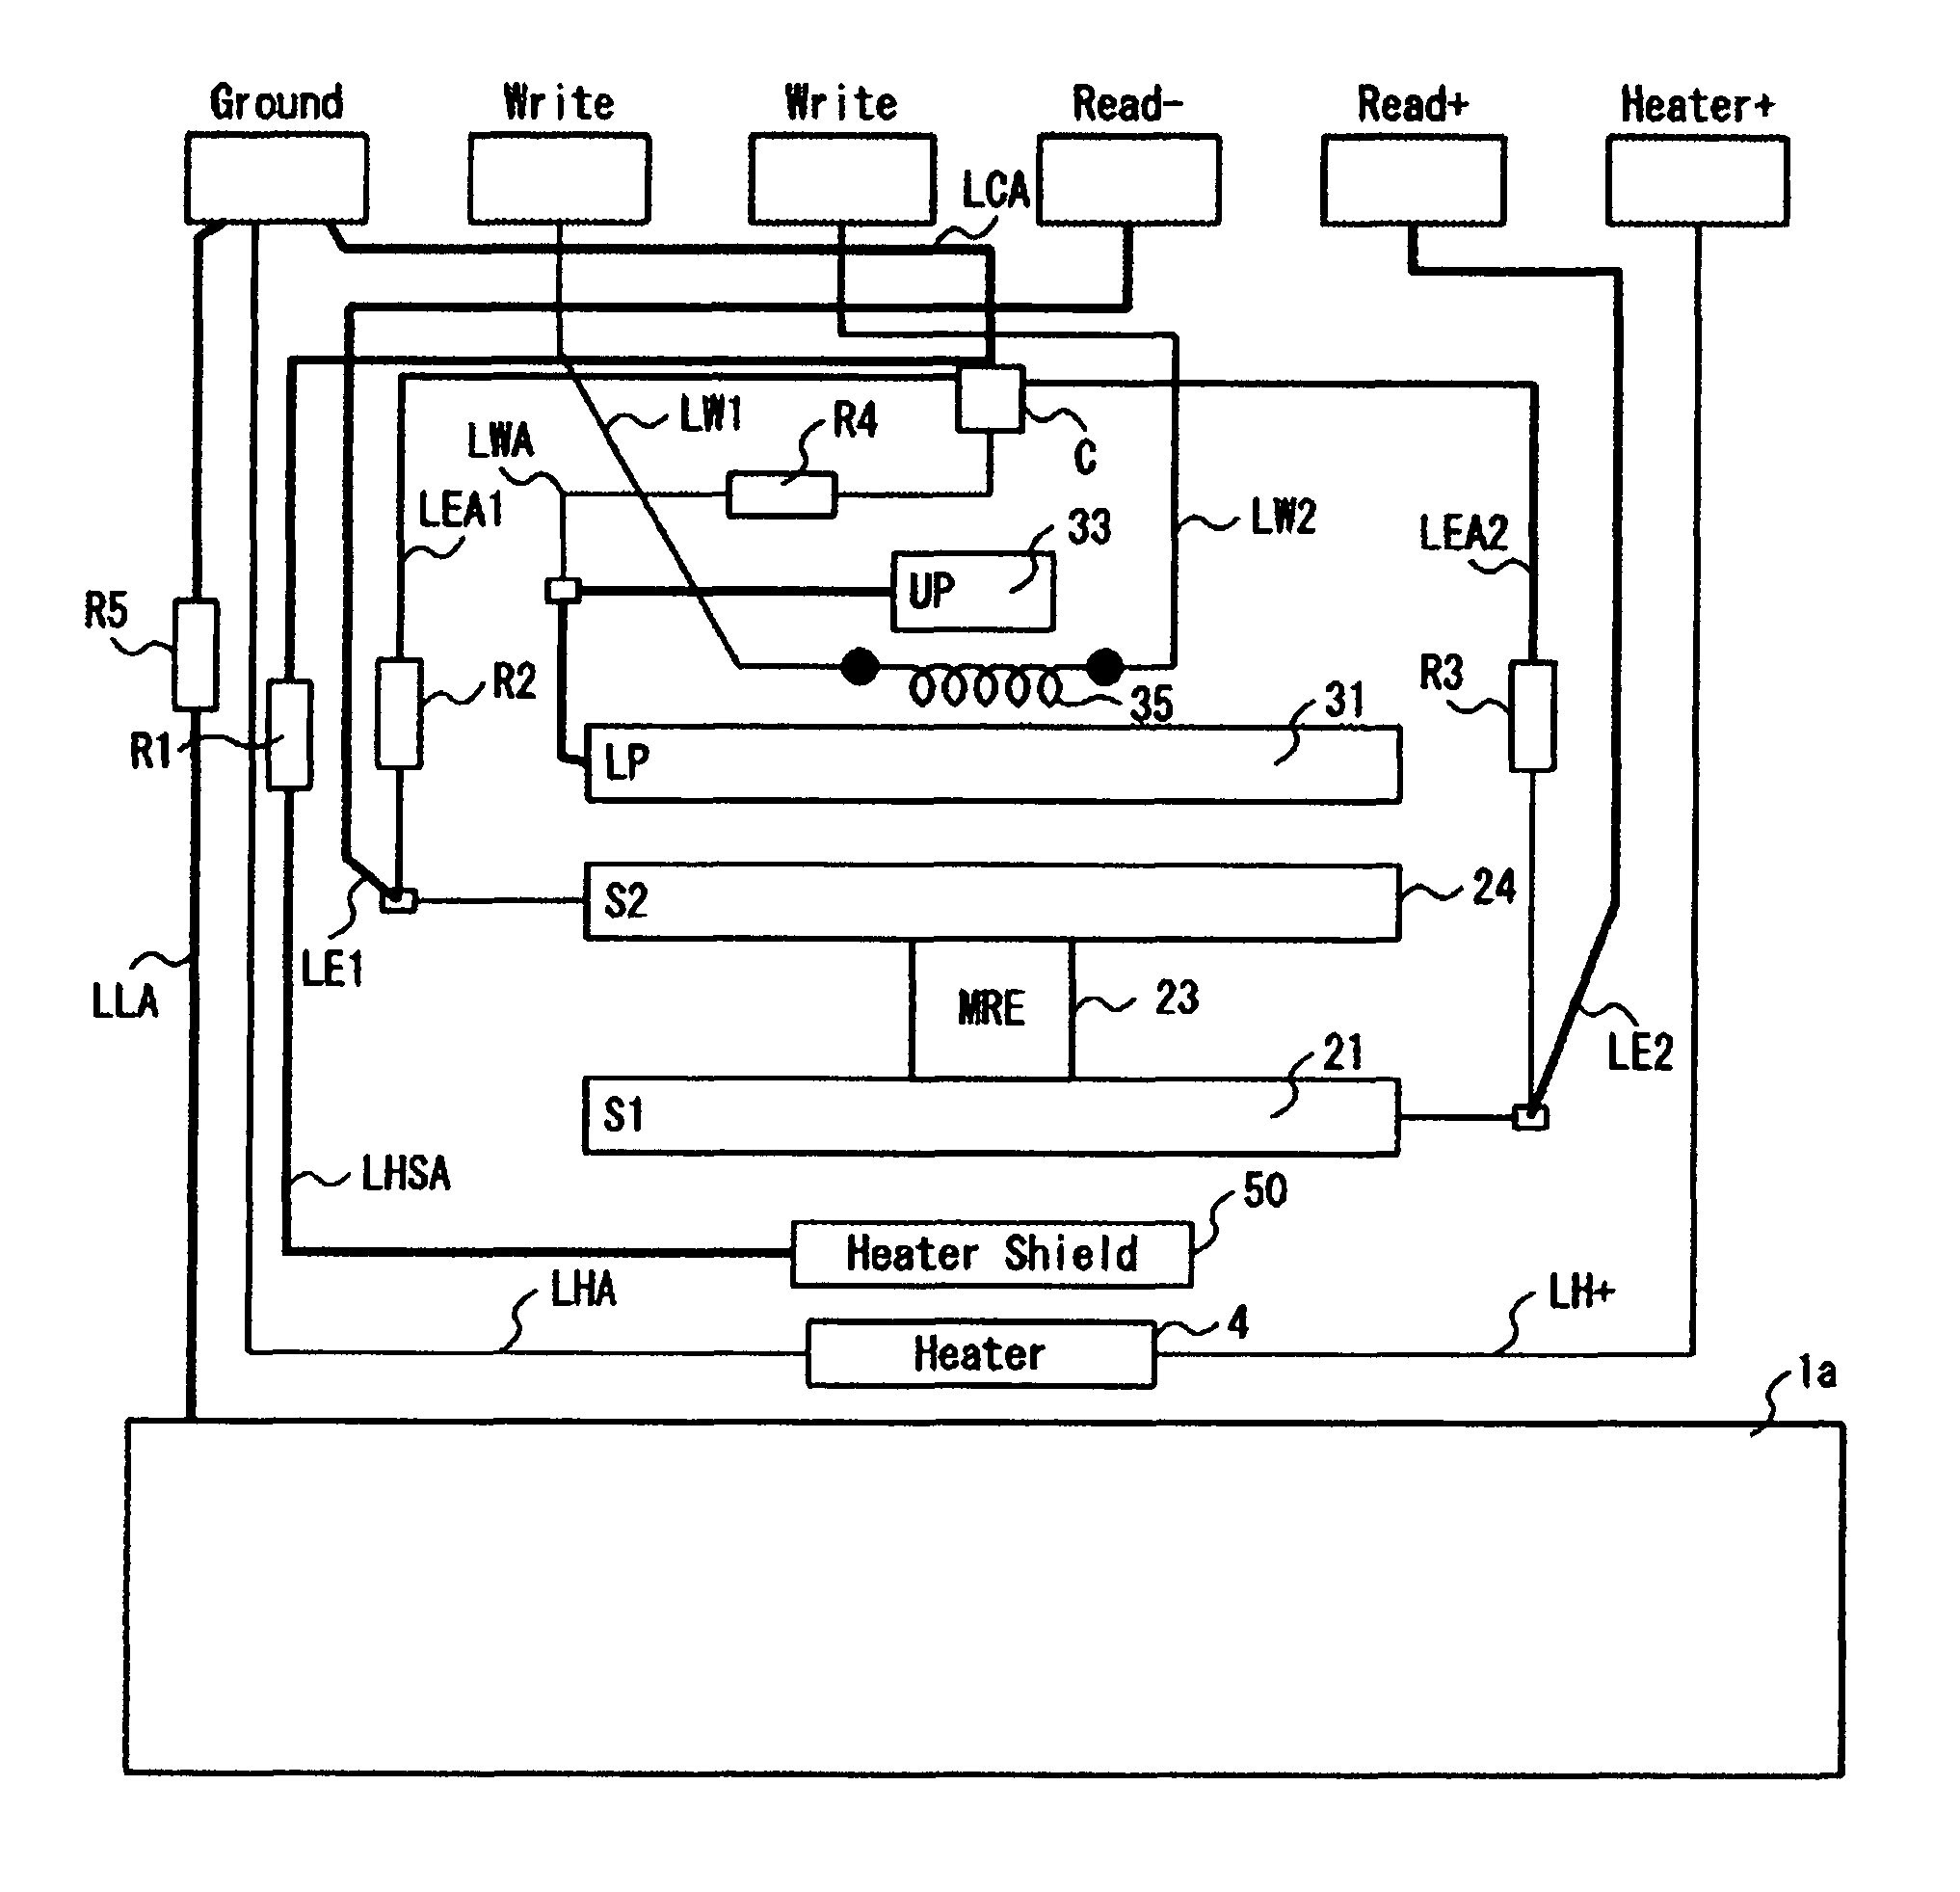 Thin film magnetic head with flying height adjustment capability